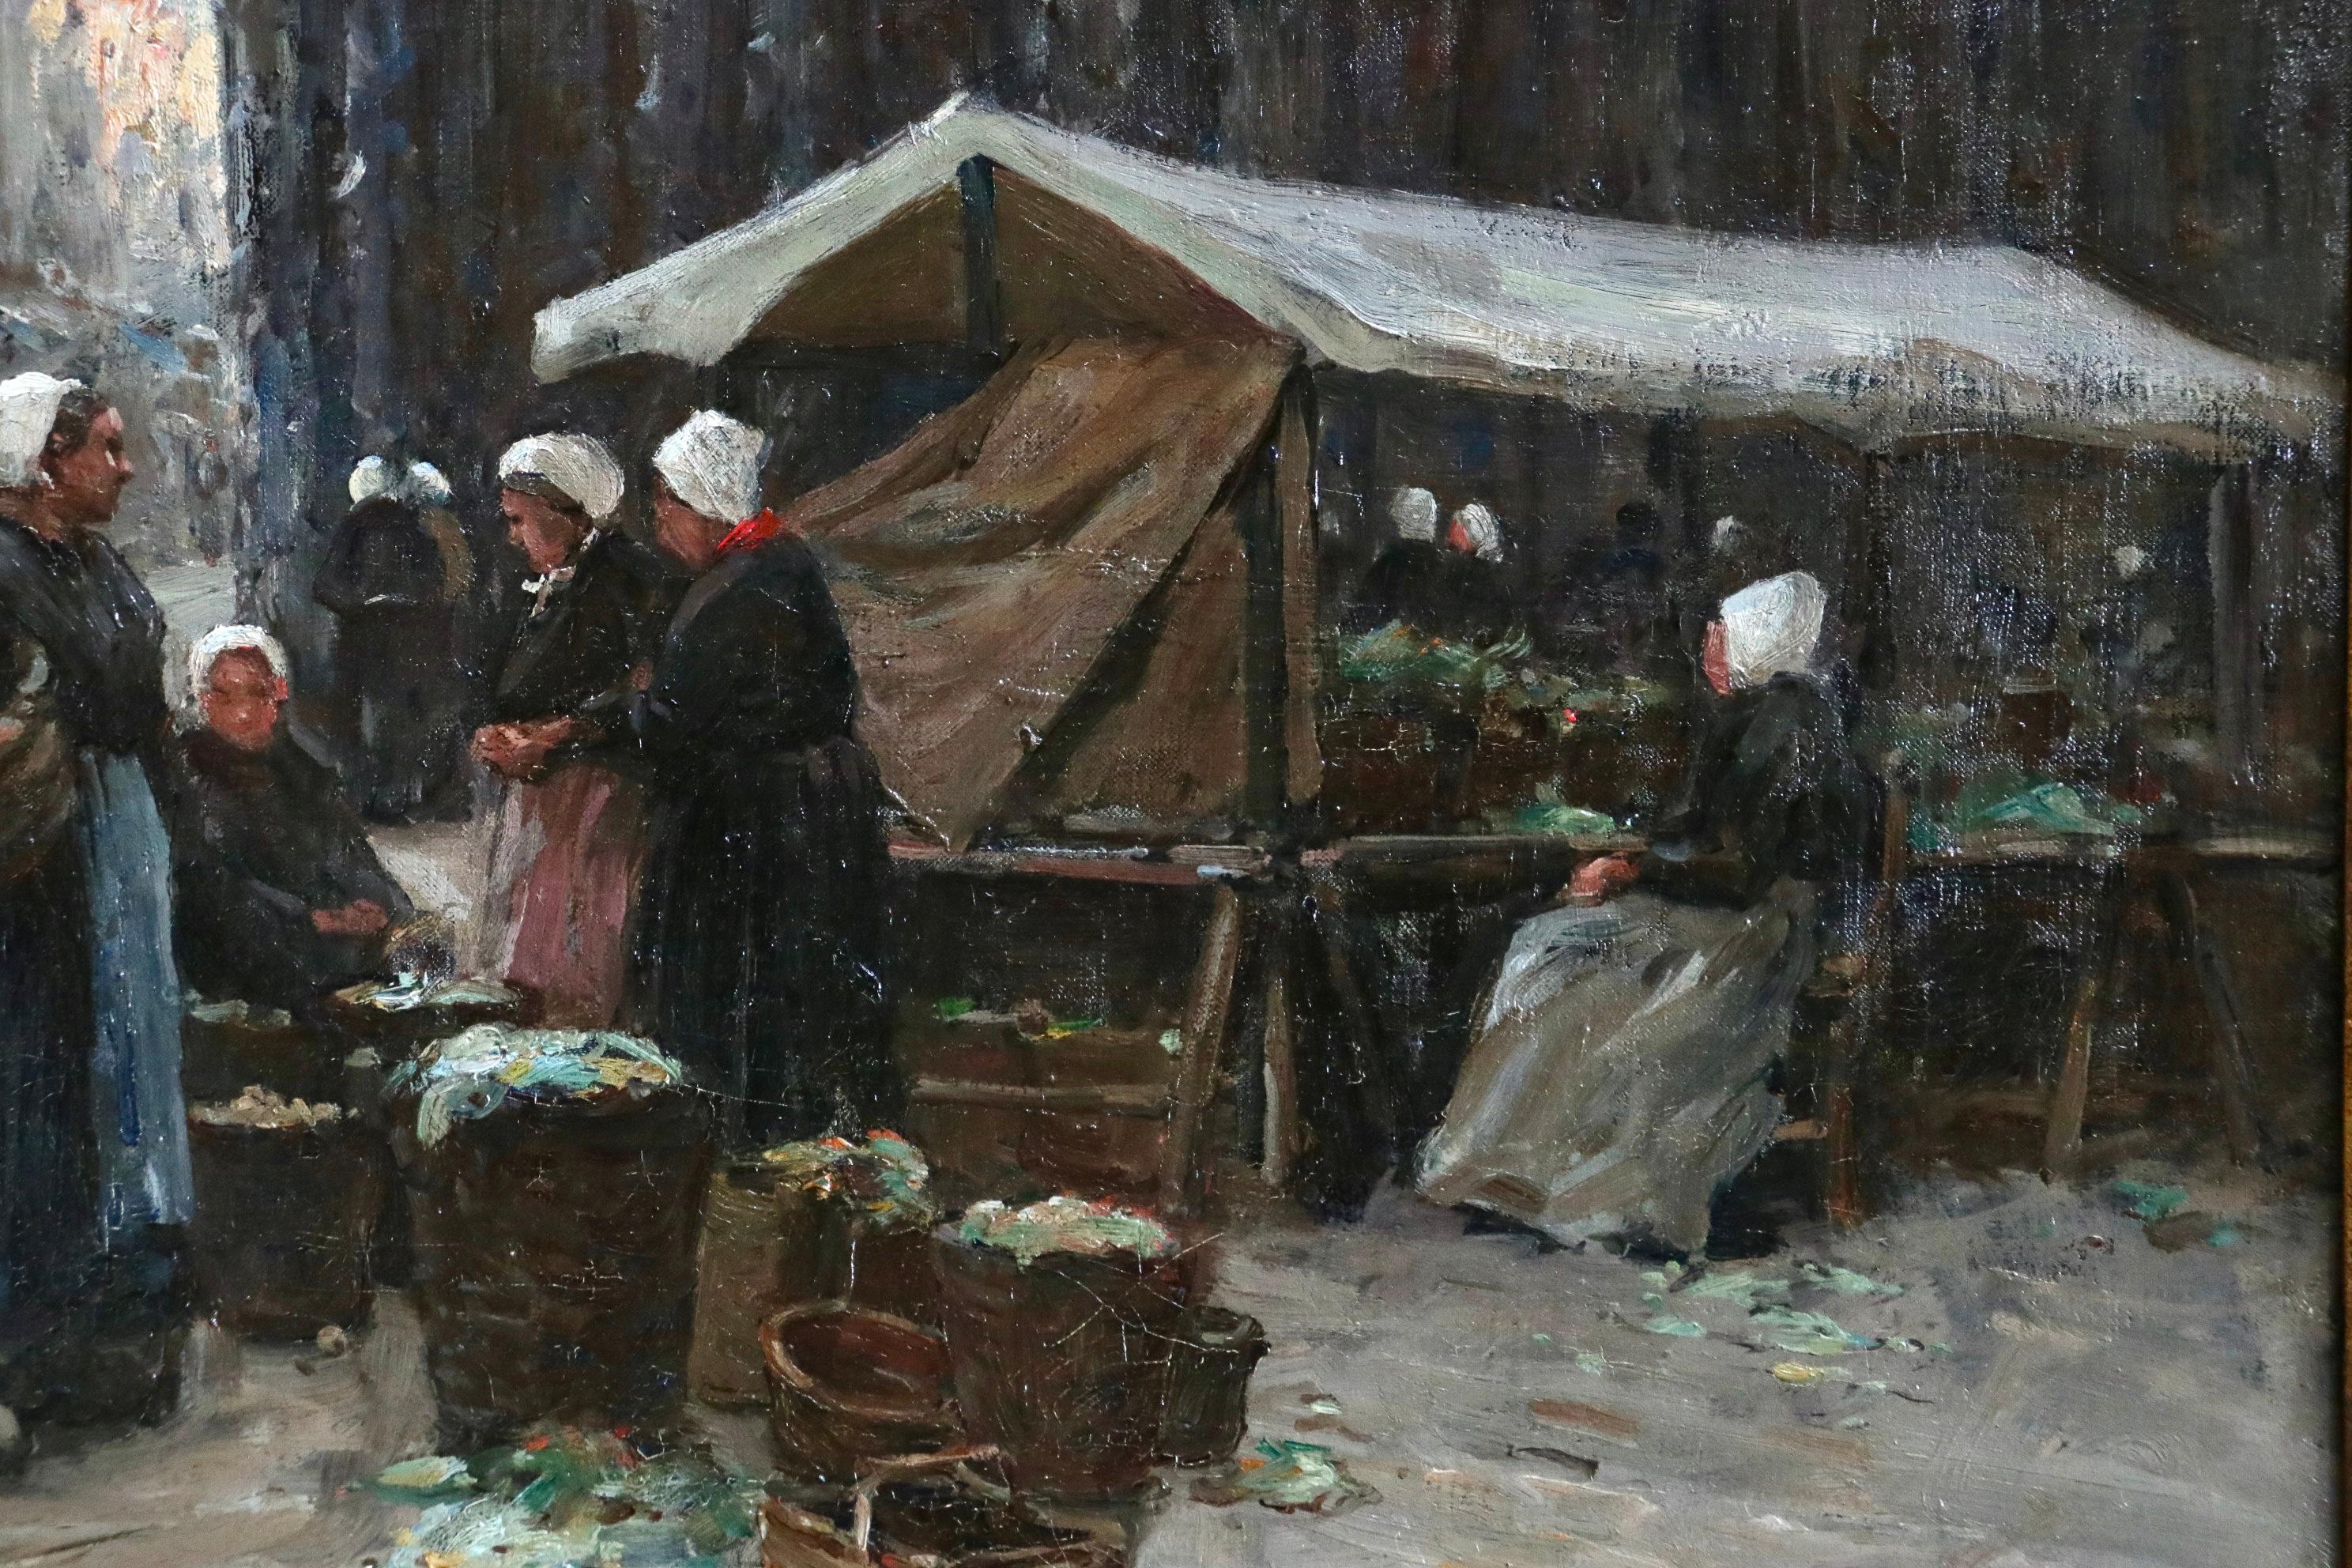 Market Day - Dieppe - 19th Century Oil, Figures in Cityscape by Terrick Williams 3